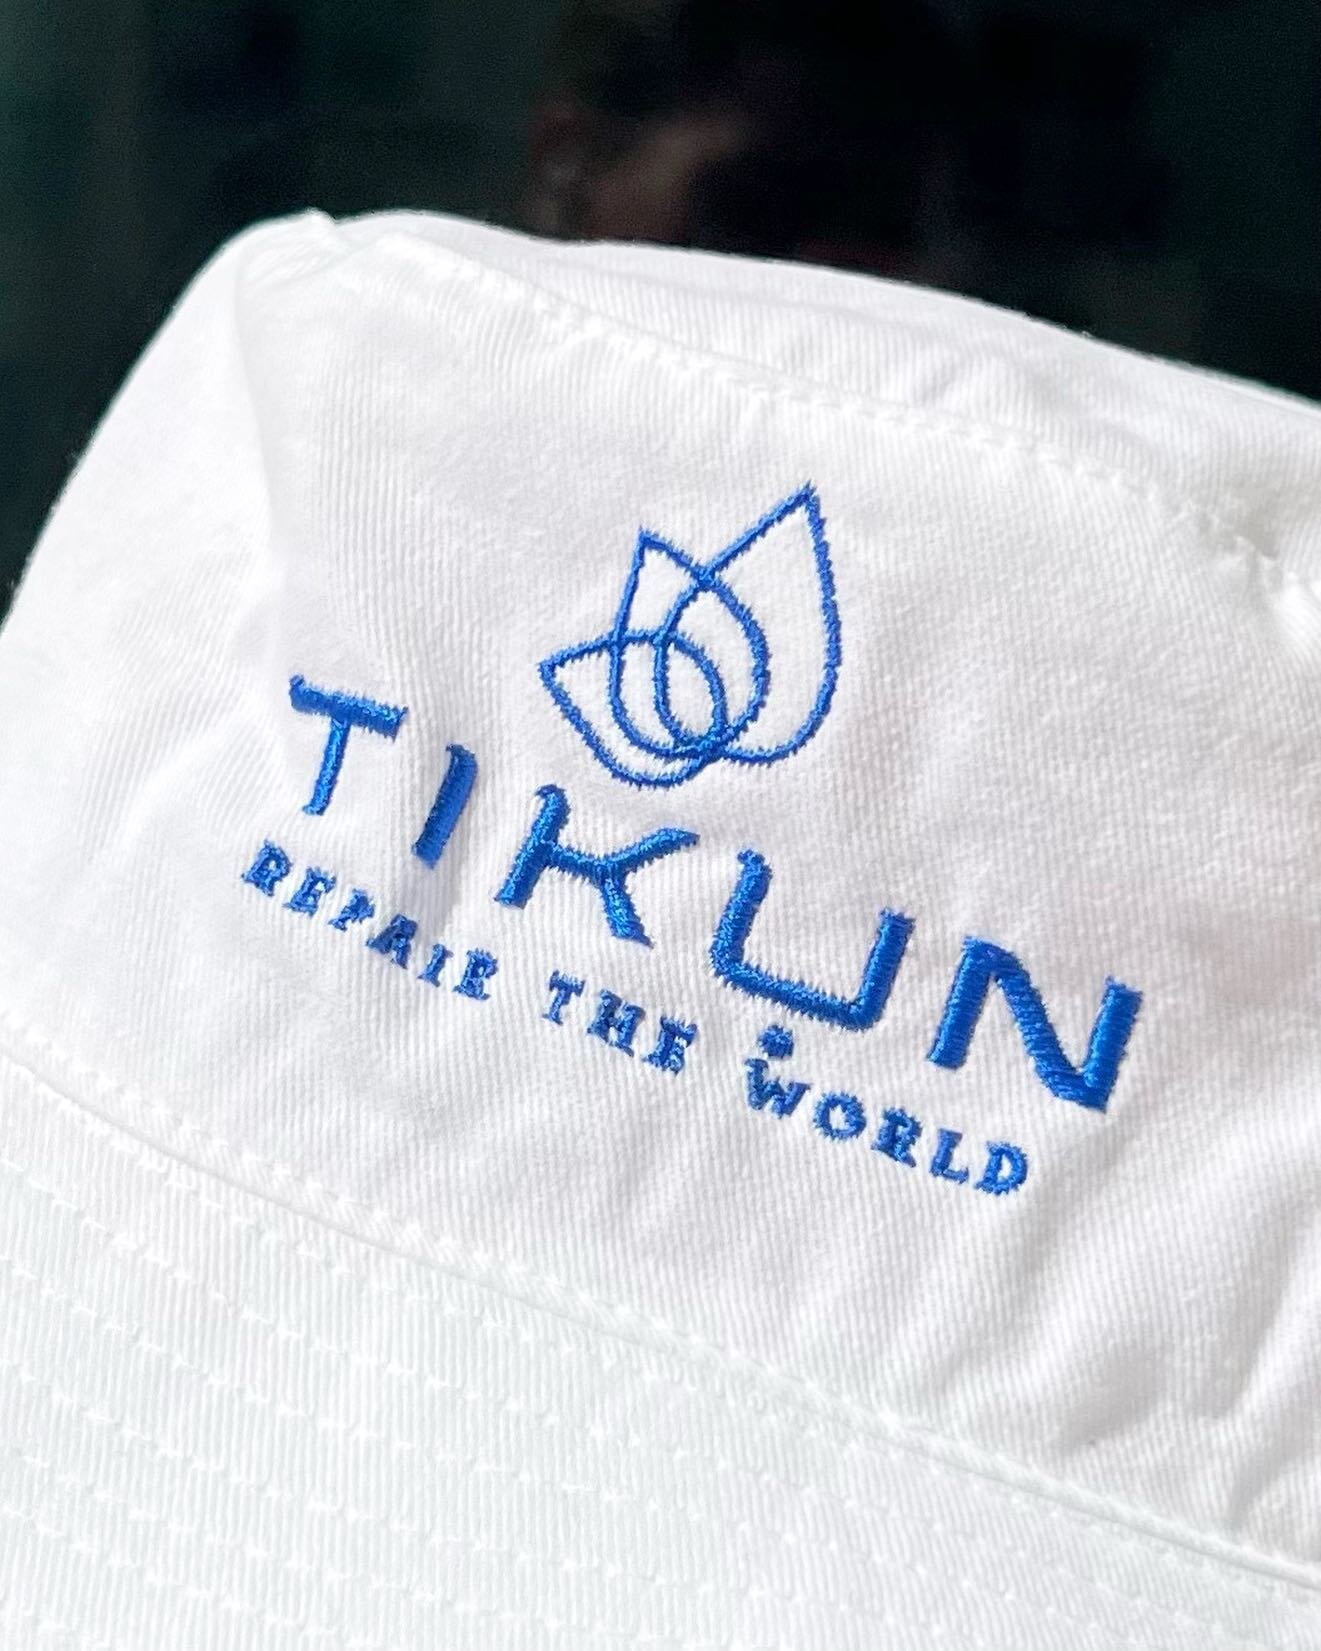 &ldquo;Tikun Olam,&rdquo; which translates to &ldquo;Repair the World&rdquo; is the mission statement that drives us forward everyday ⚕️🌿

Bringing positive change to the world, one bud at a time. We are proud to be a mission-driven cannabis company